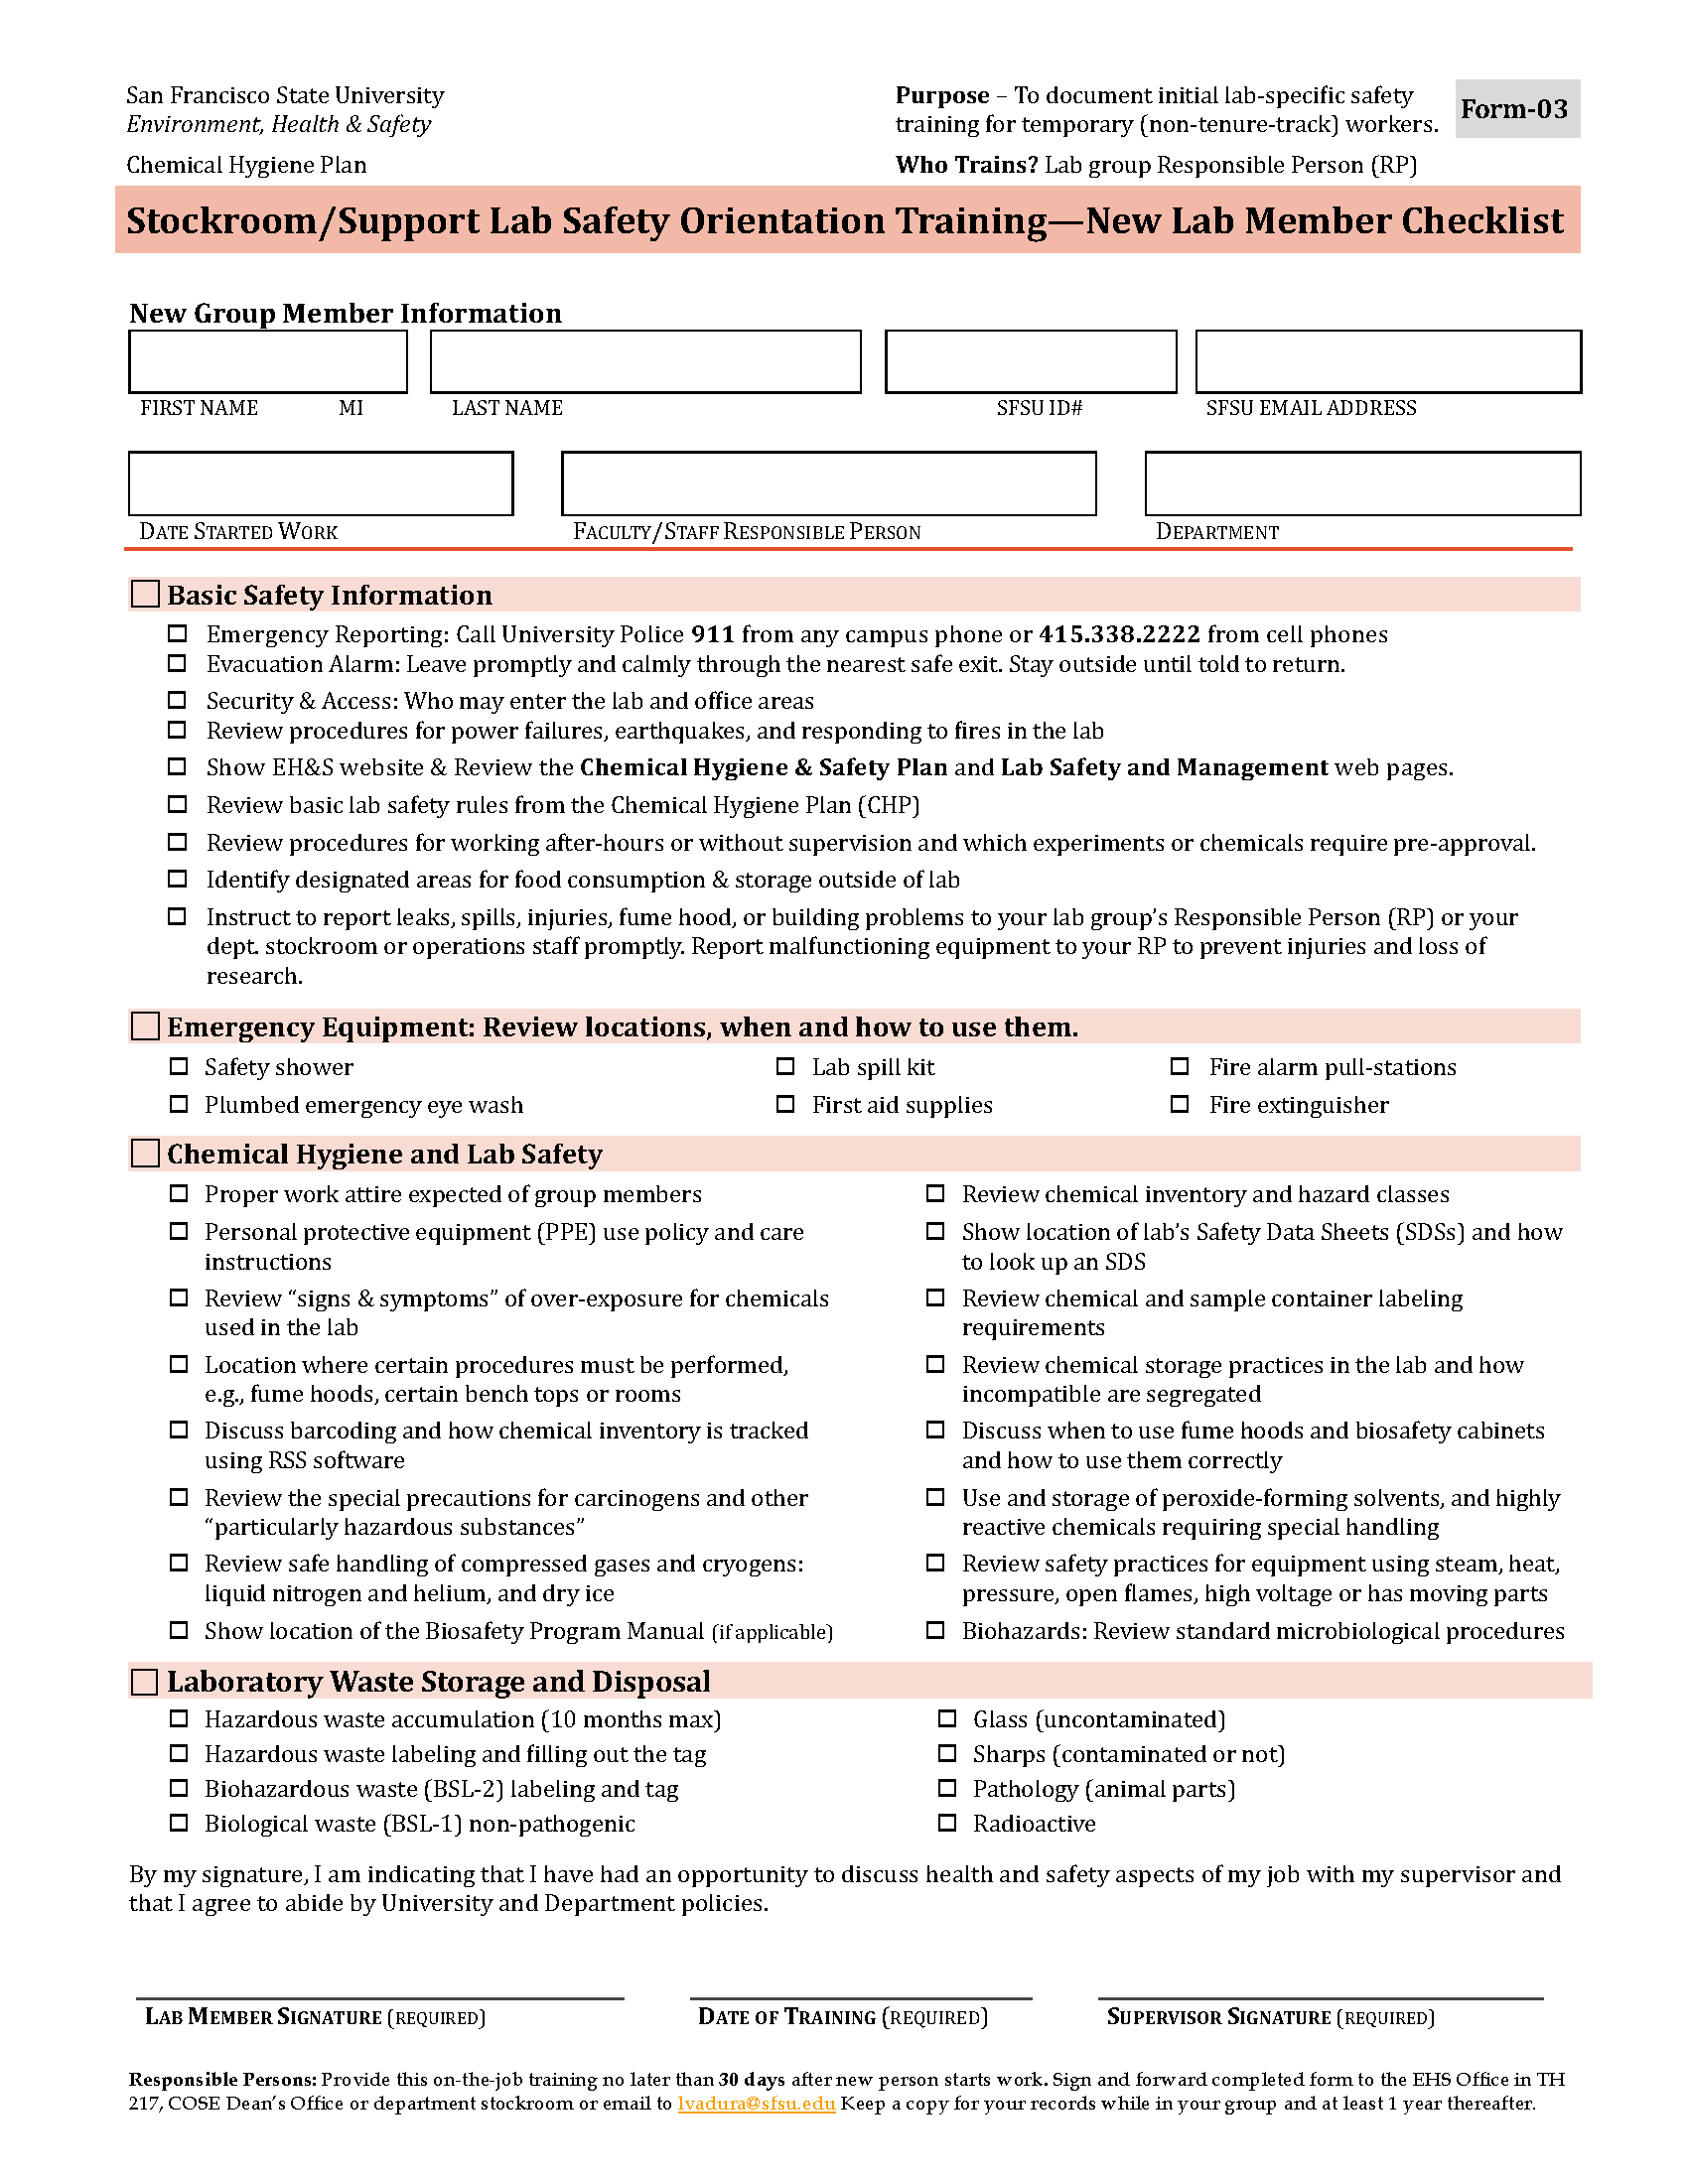 New Stockroom or Support Lab or Operation member safety orientation form